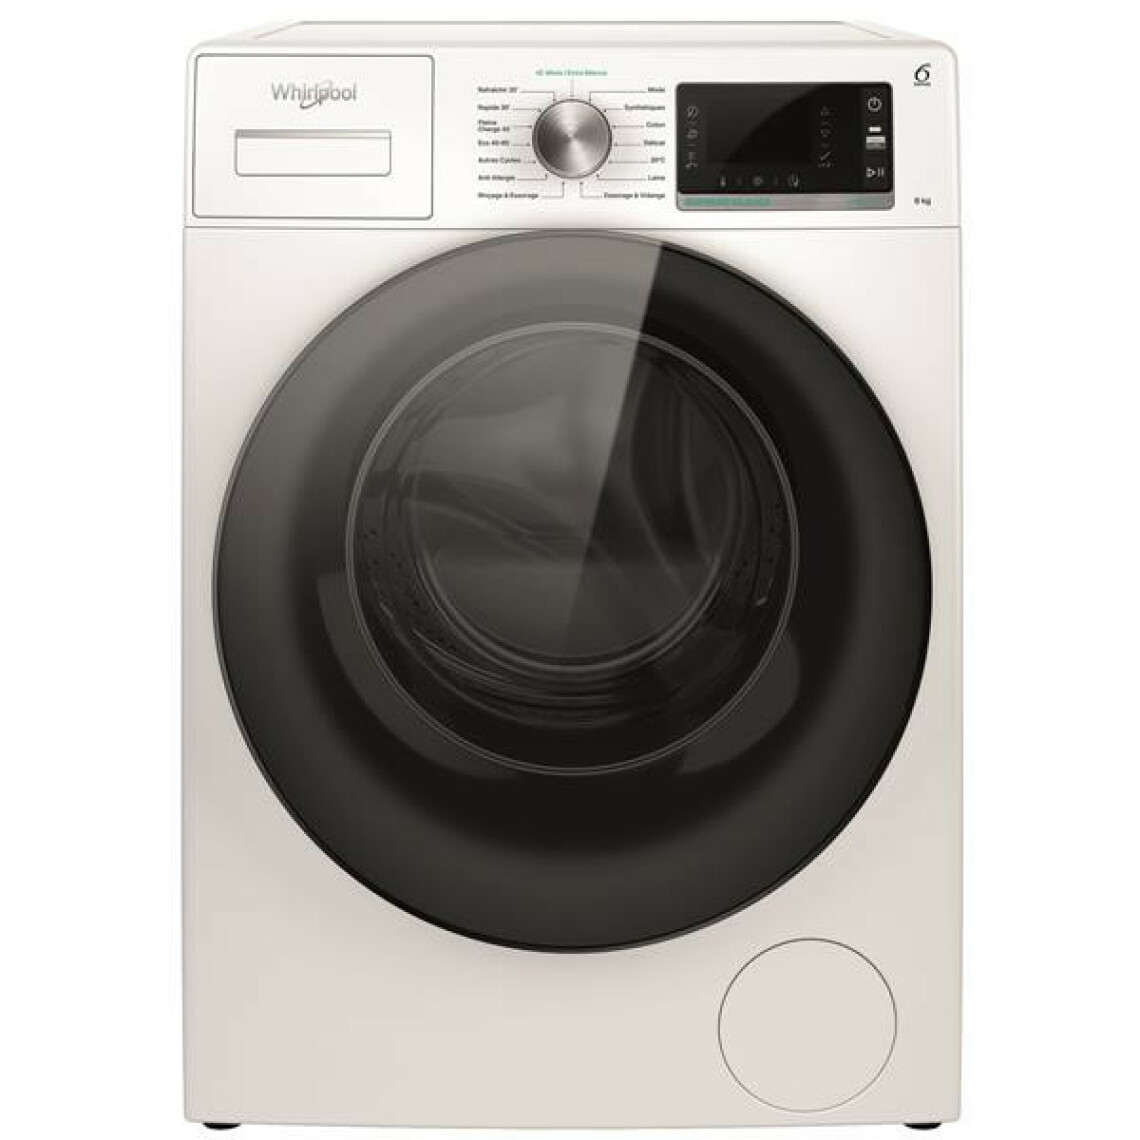 whirlpool - Lave linge Frontal W6W845WBFR - Lave-linge